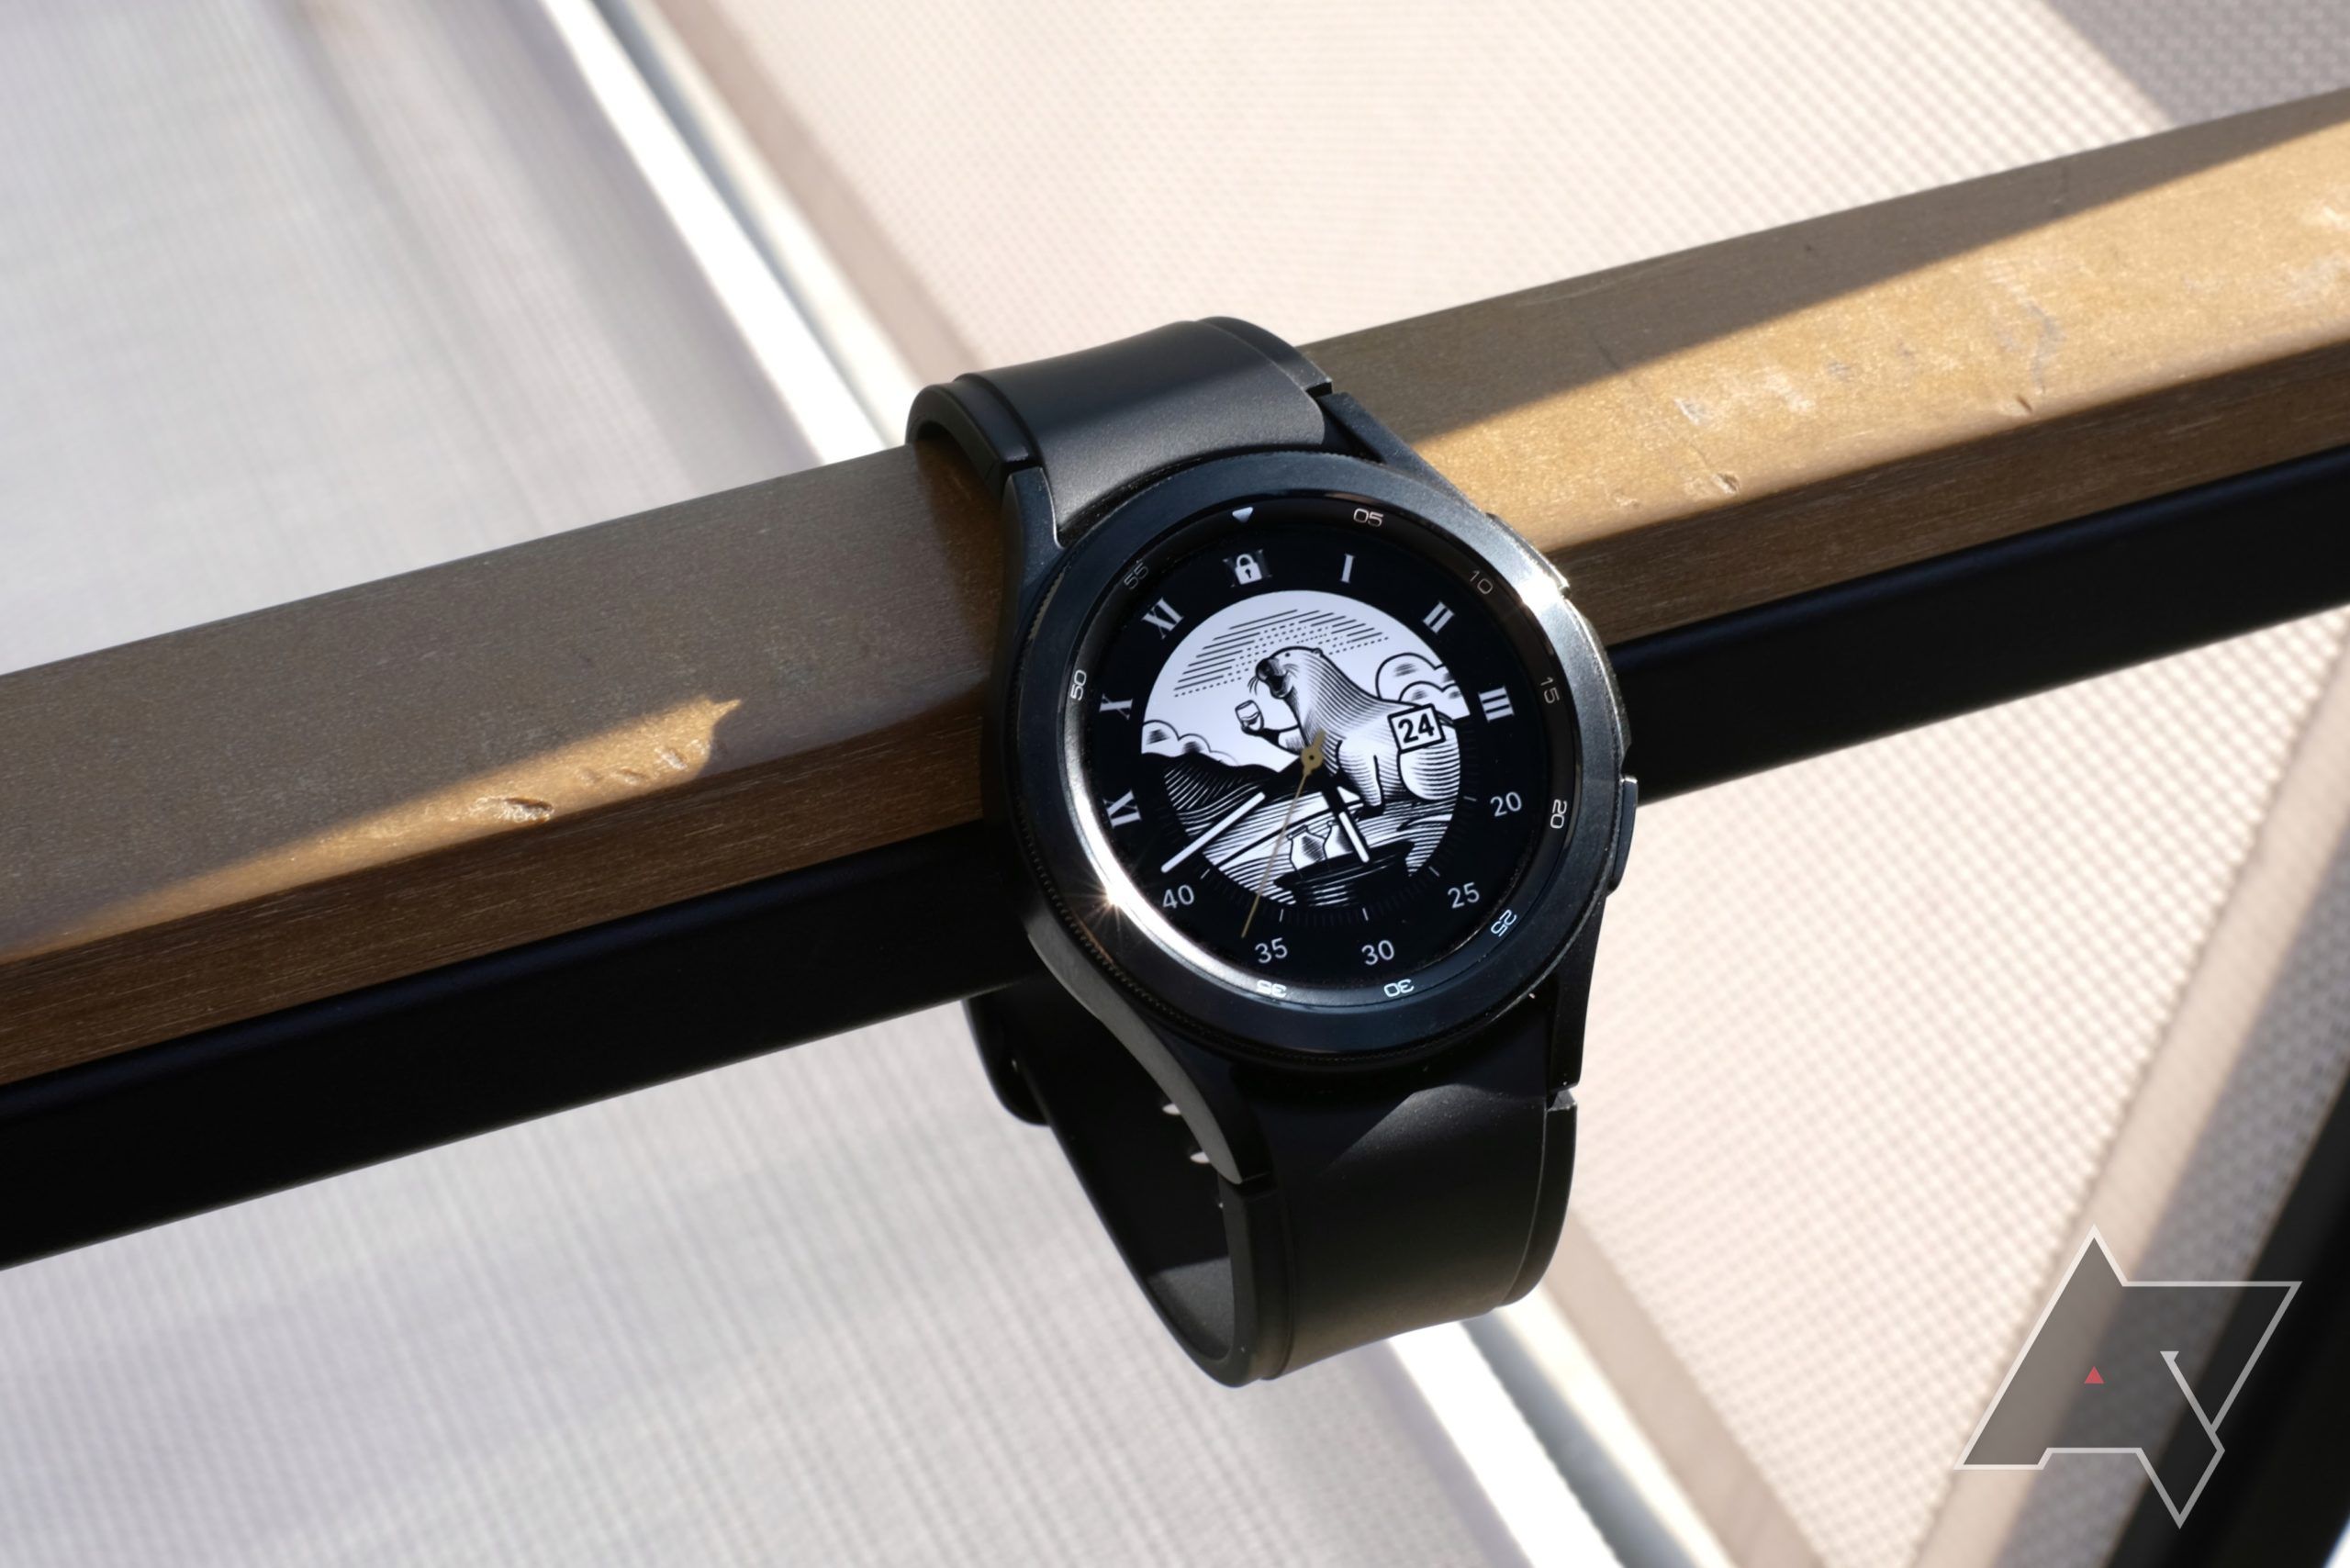 New leaked Samsung Galaxy Watch 5 promo materials highlight fast-charging and more